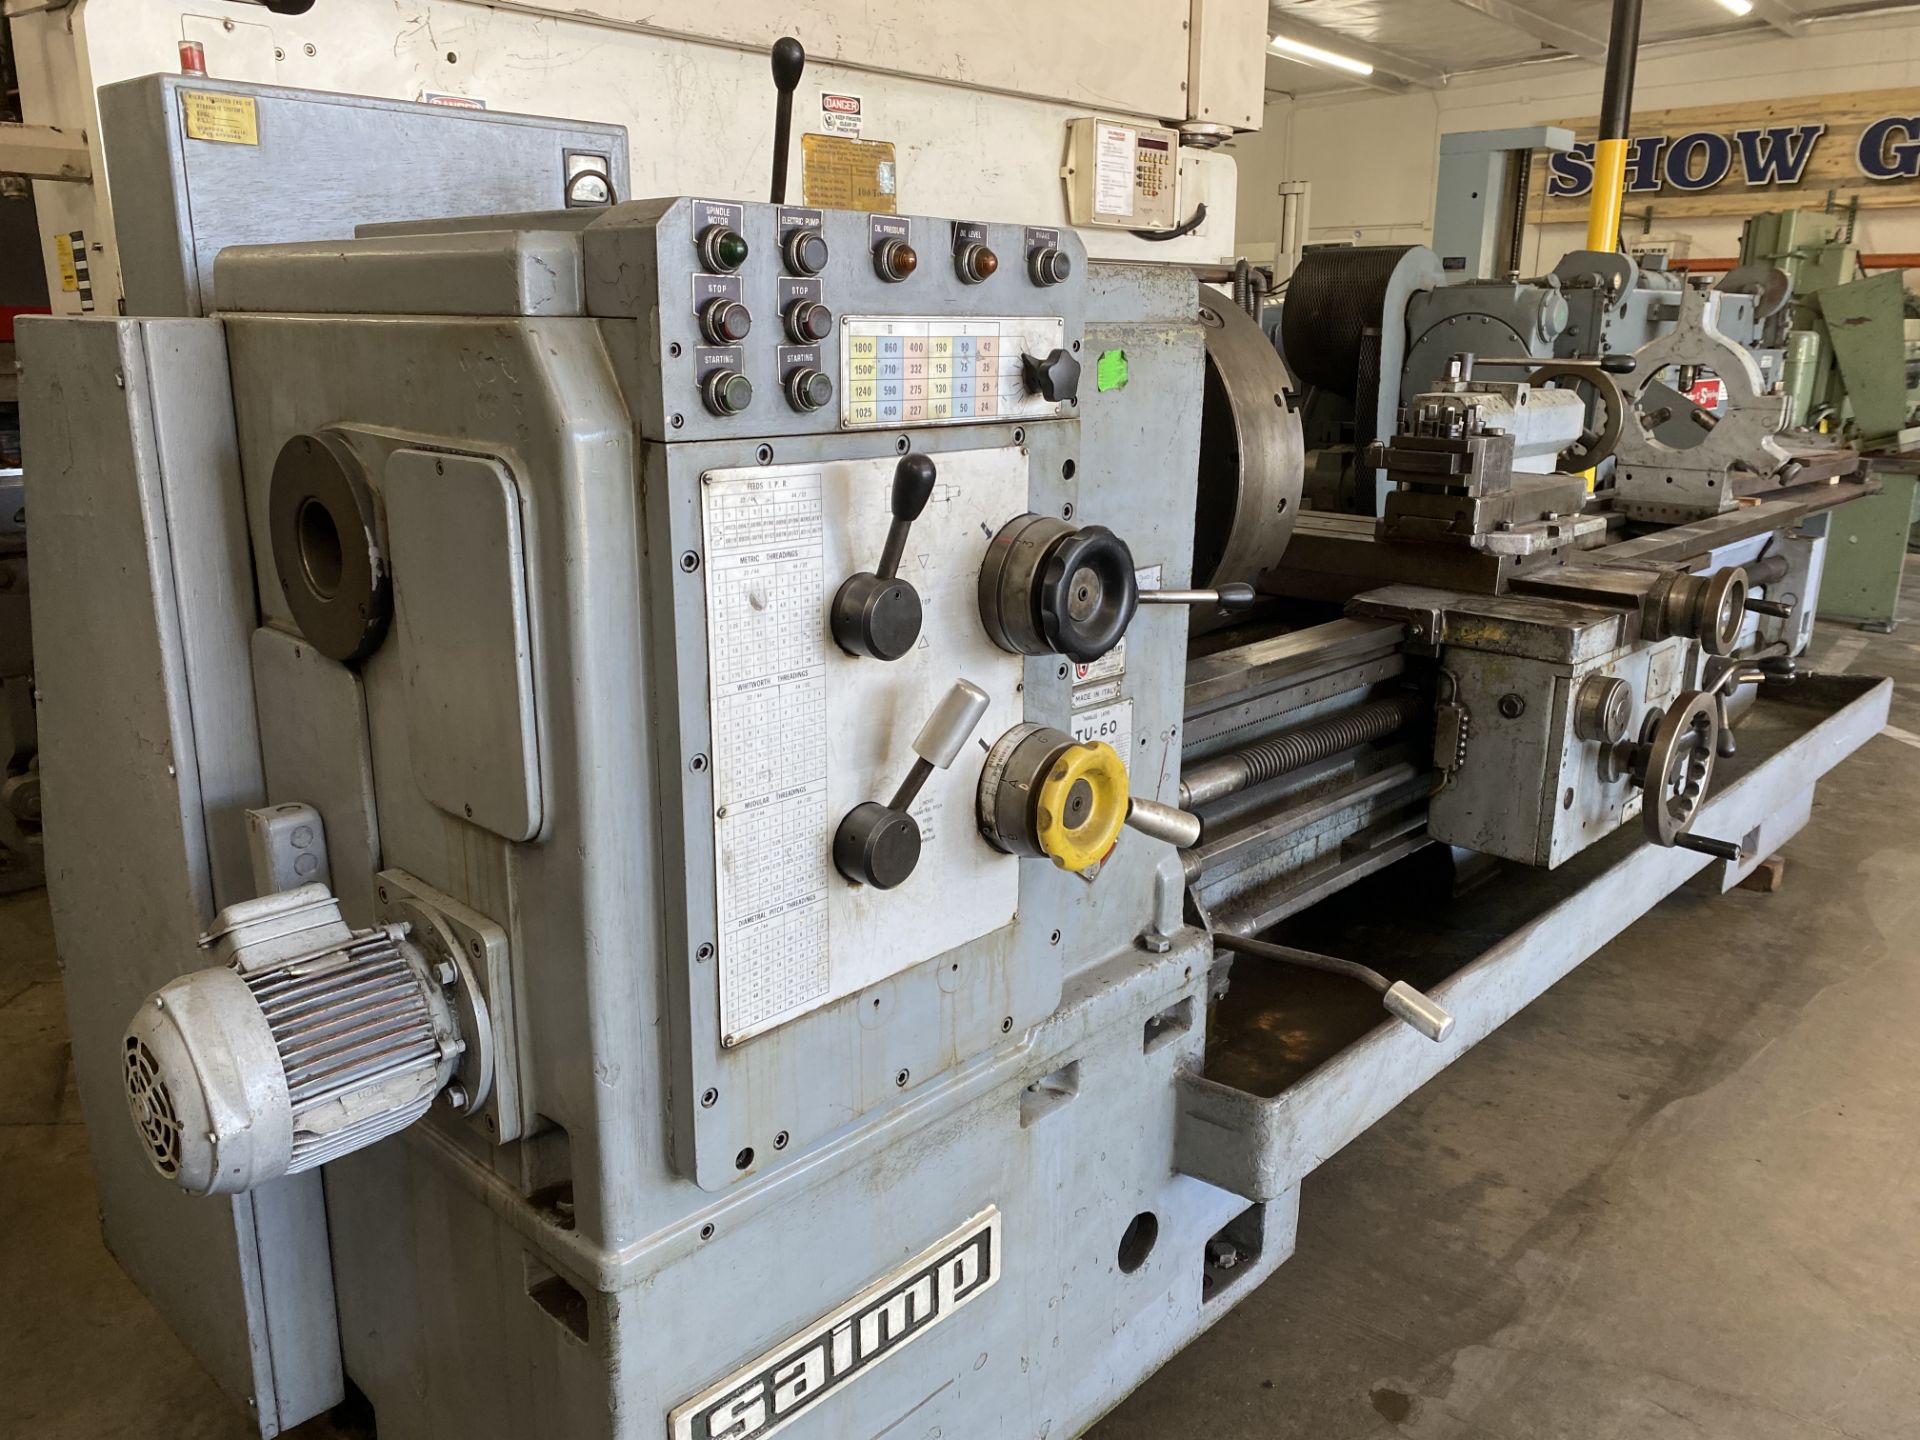 Saimp TU-60 24” x 80” Engine Lathe s/n 1096 w/ 24-1800 RPM, Inch/mm Threading, 3” SOLD AS IS - Image 3 of 10